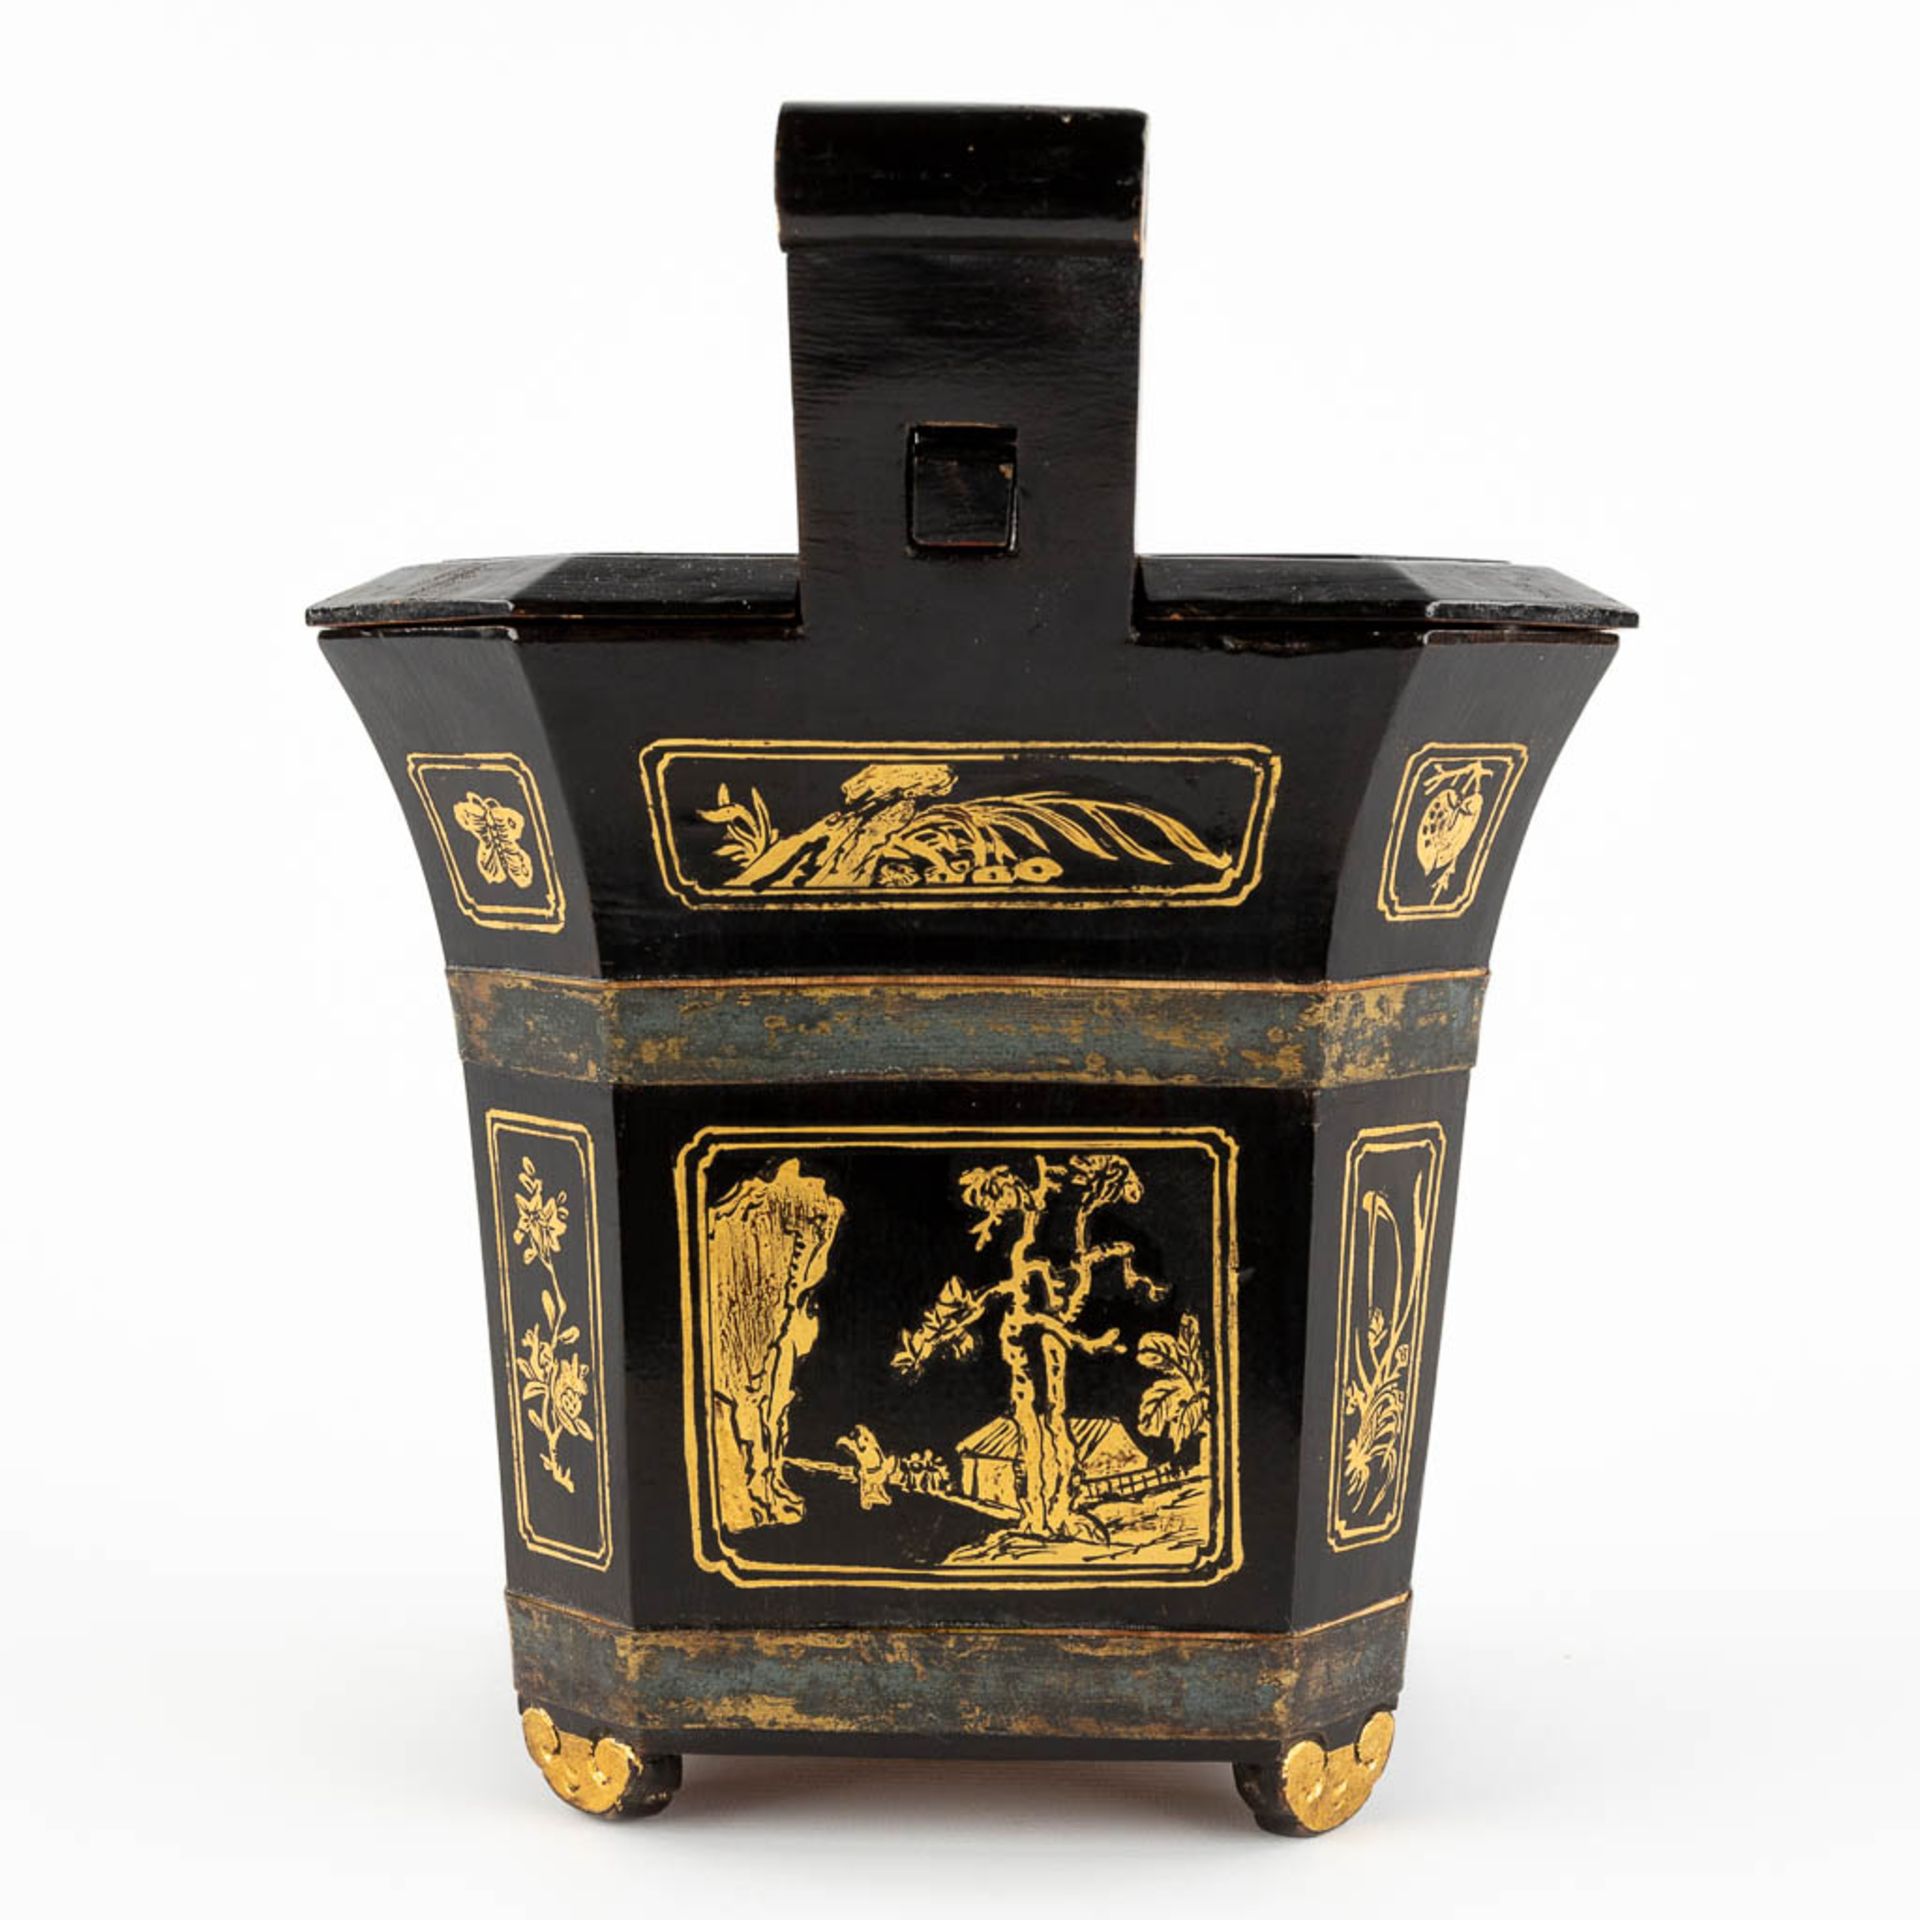 A Chinese carrying case for a teapot, gilt wood with lacquer and dragon figurines. 20th C. (D:24 x W - Image 5 of 16